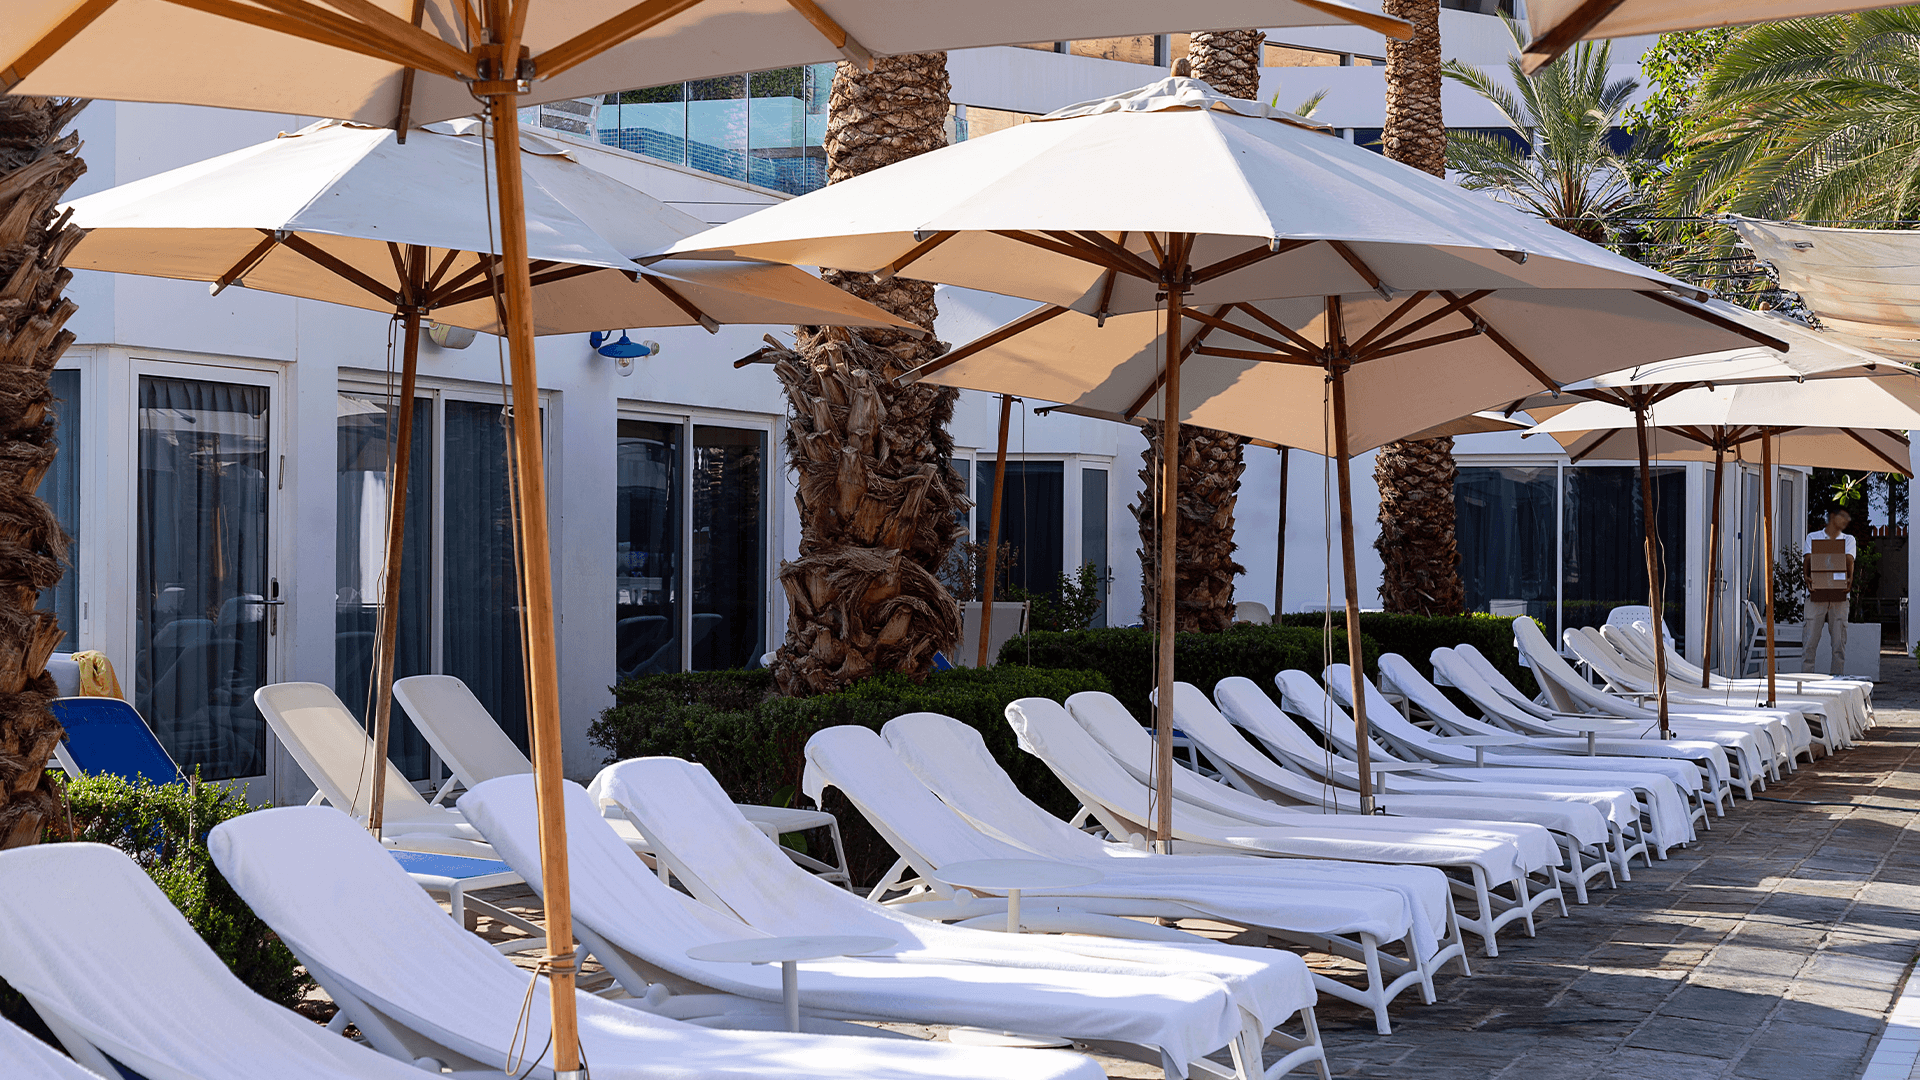 Beach chairs, umbrellas around swimming pool with palm trees background.